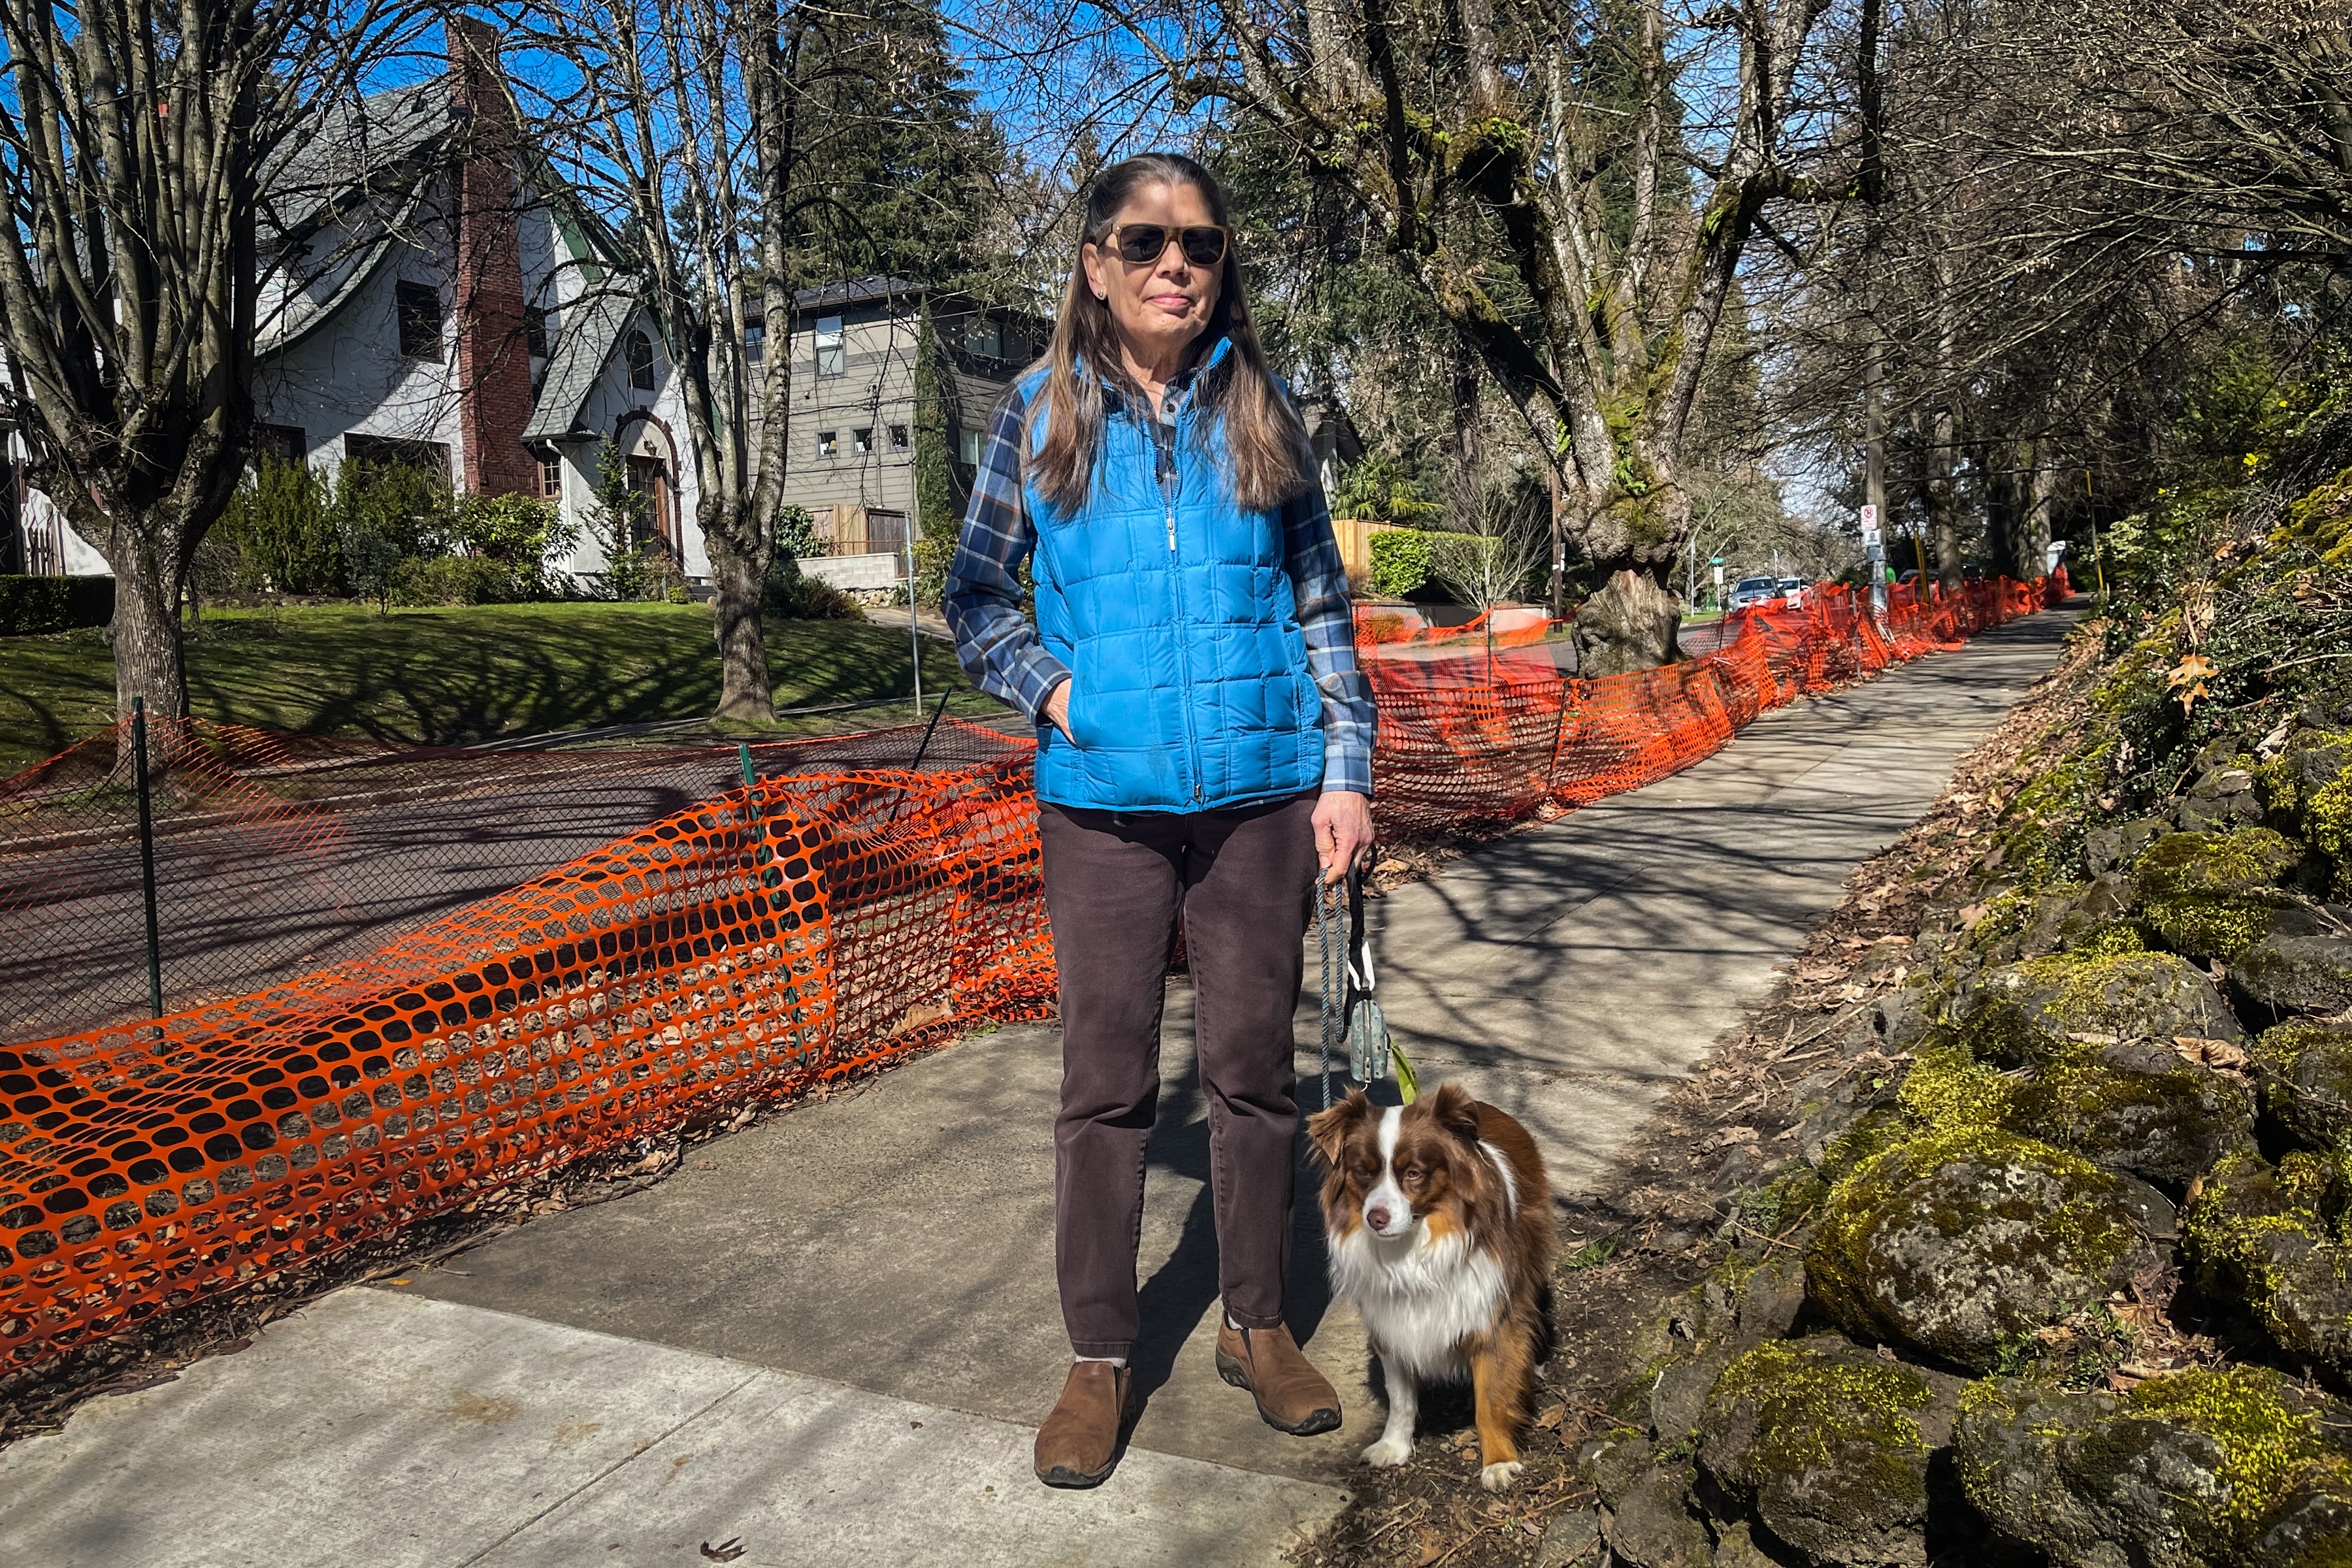 A photo shows TJ Browning with her dog on the sidewalk near her home. Orange fencing lines the edge of street.